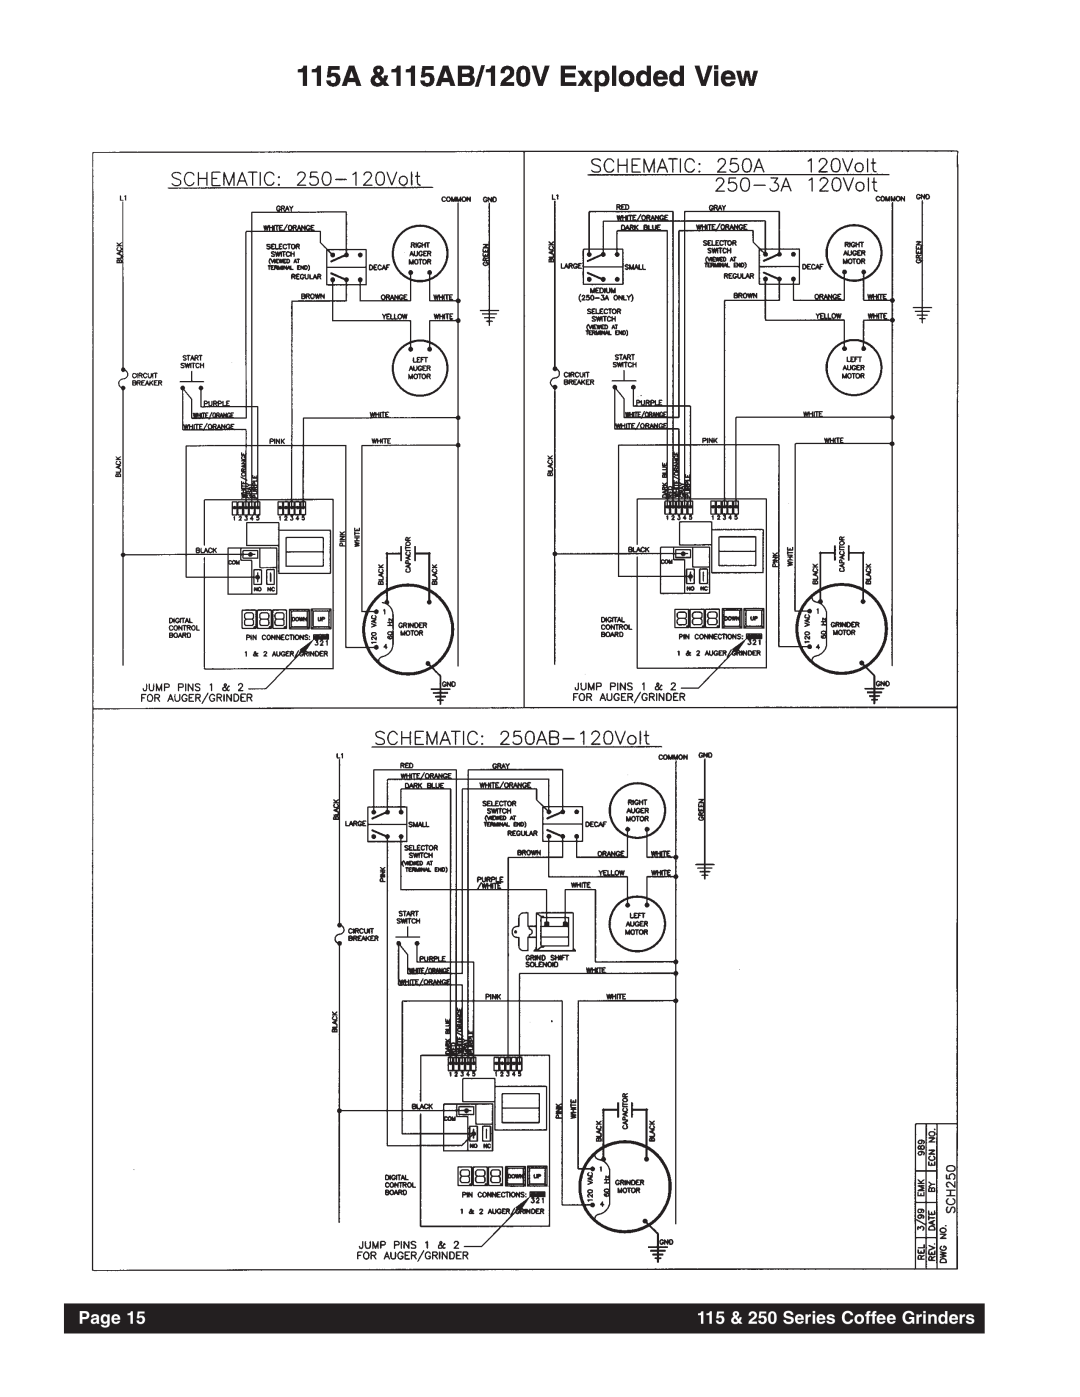 Grindmaster instruction manual 115A &115AB/120V Exploded View, Page, 115 & 250 Series Coffee Grinders 